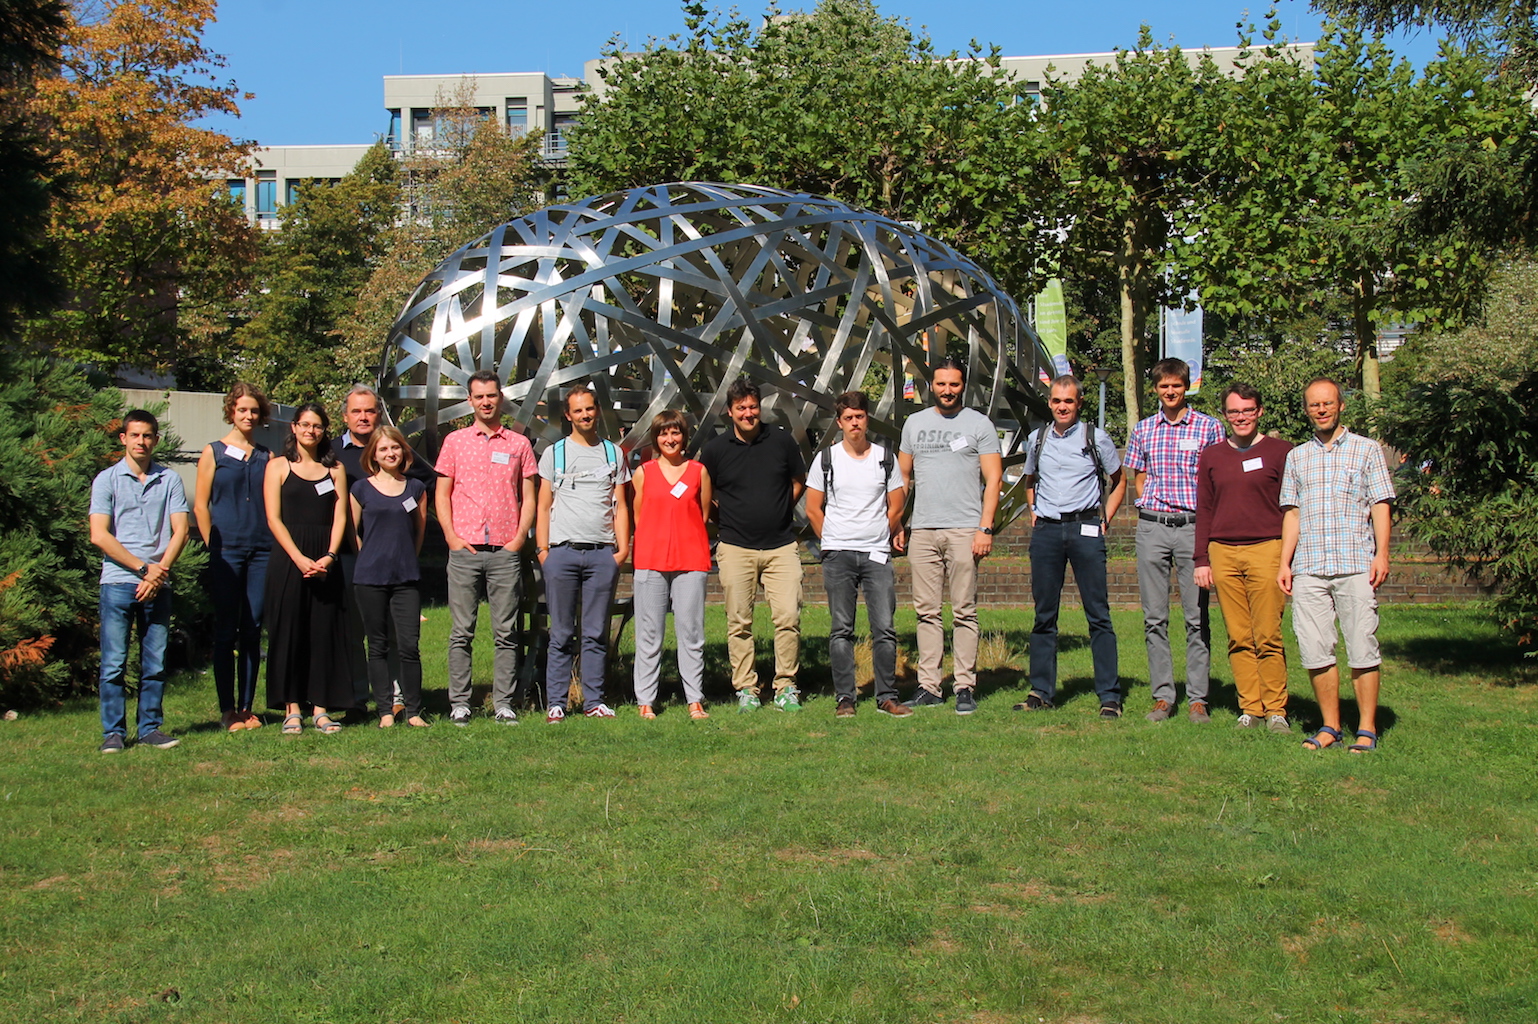 Zeta functions of groups and dynamical systems conference photo 2